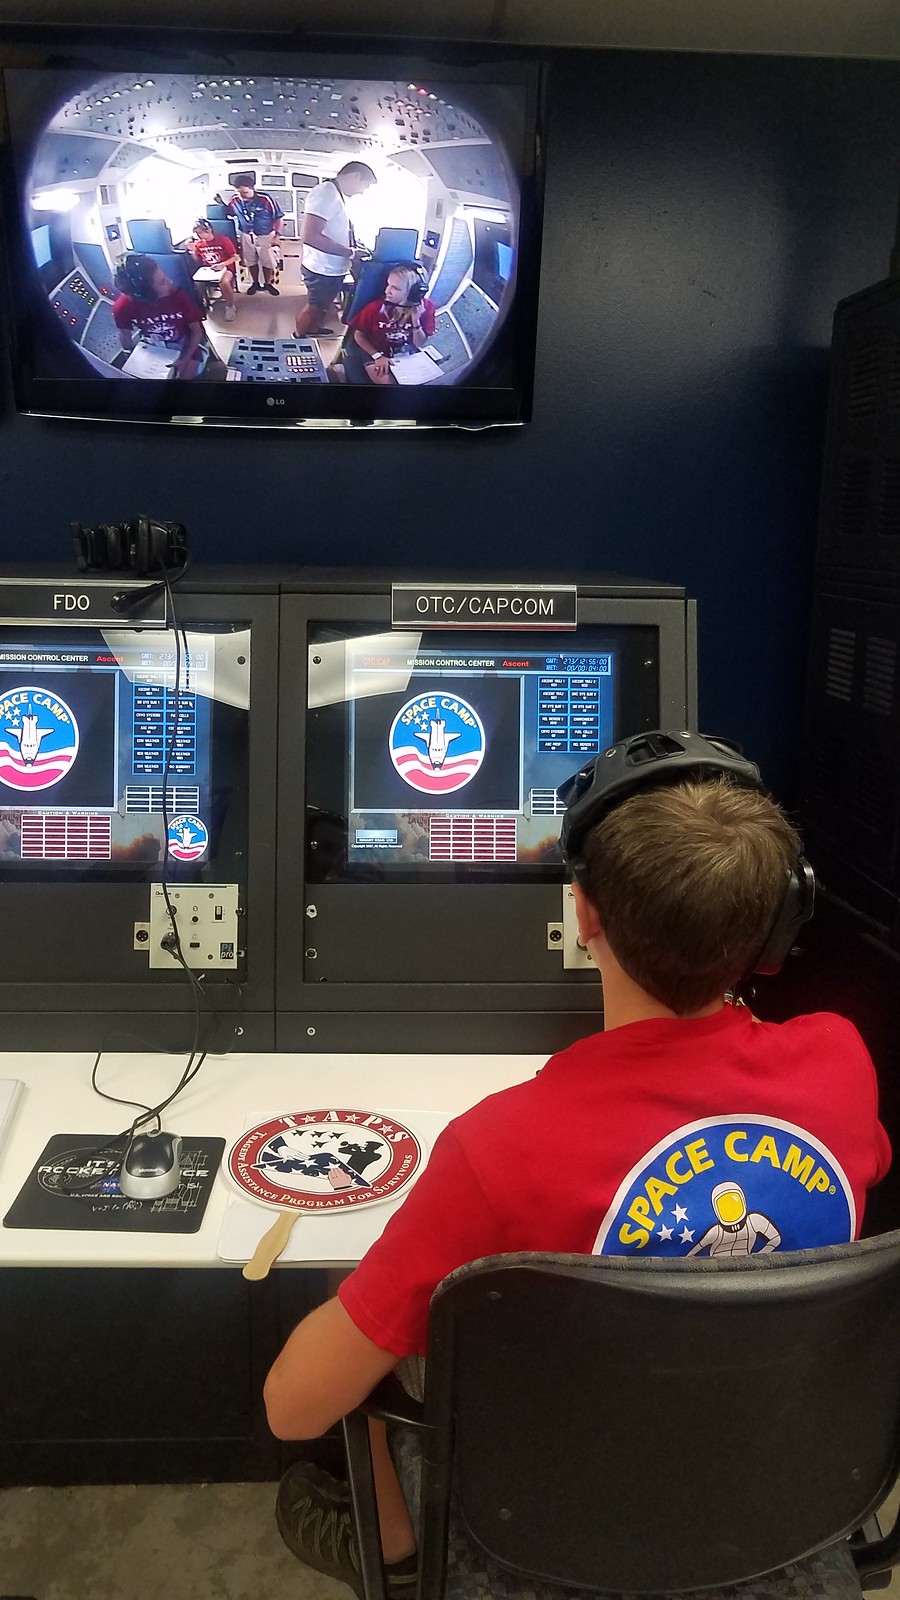 2019_YP_Space Camp 26